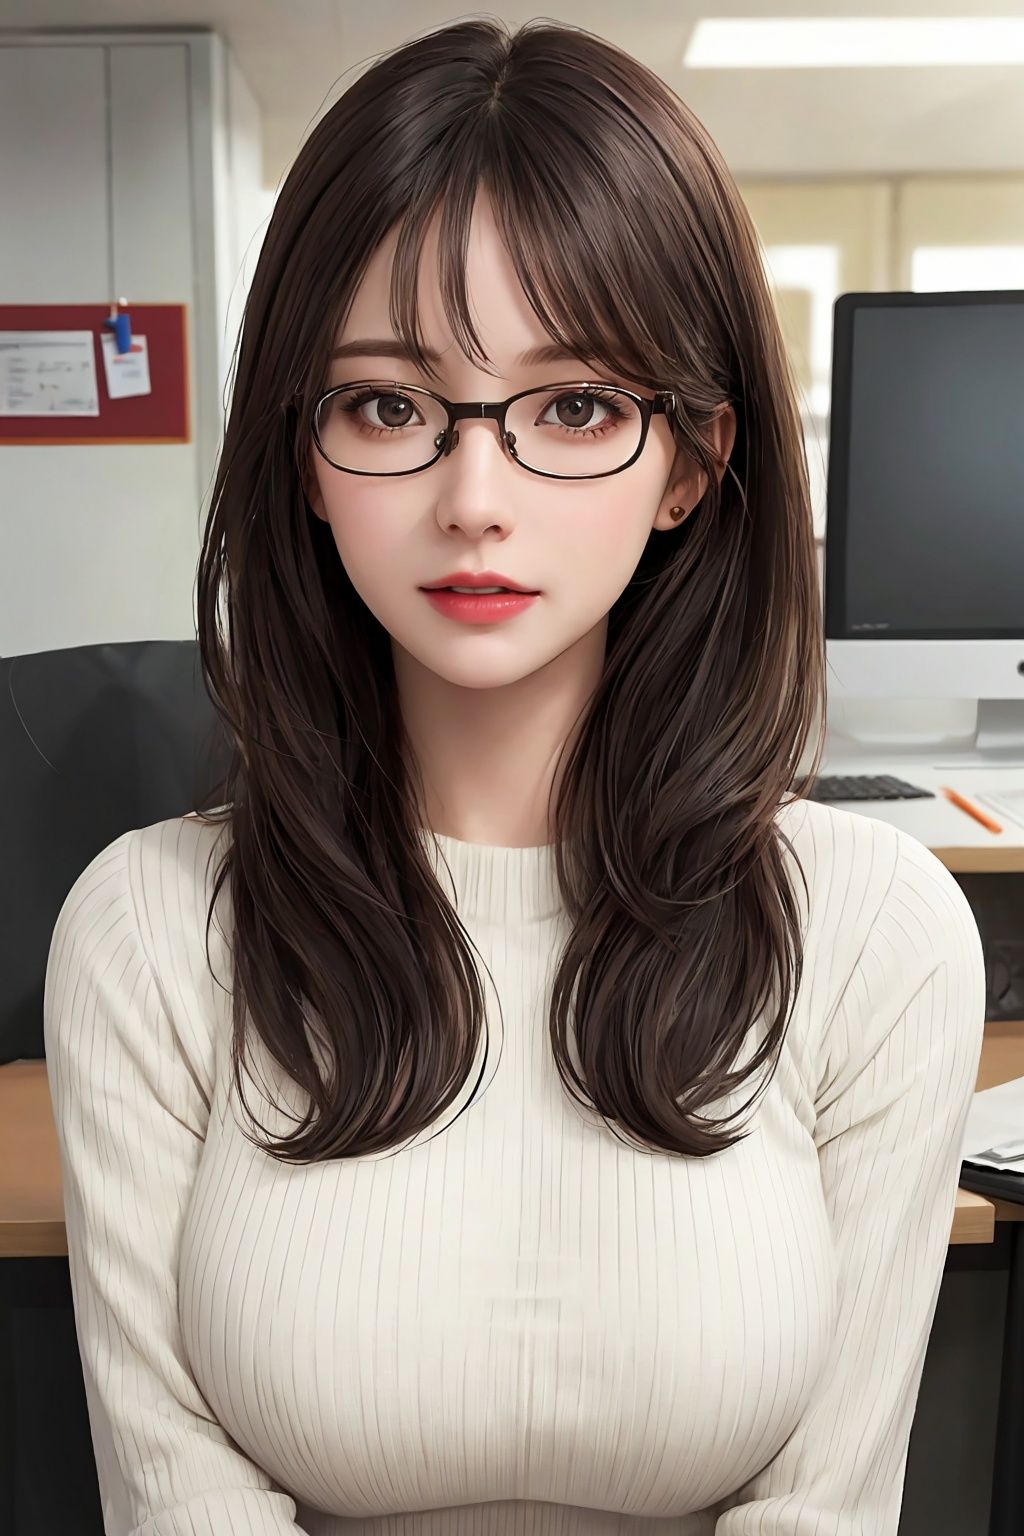 Masterpiece,best quality,super detailed,realistic,1 girl,wearing a tight winter sweater,realistic illustration,detailed face,big breasts,glasses,cute office lady,intricate details,very detailed,in the office,